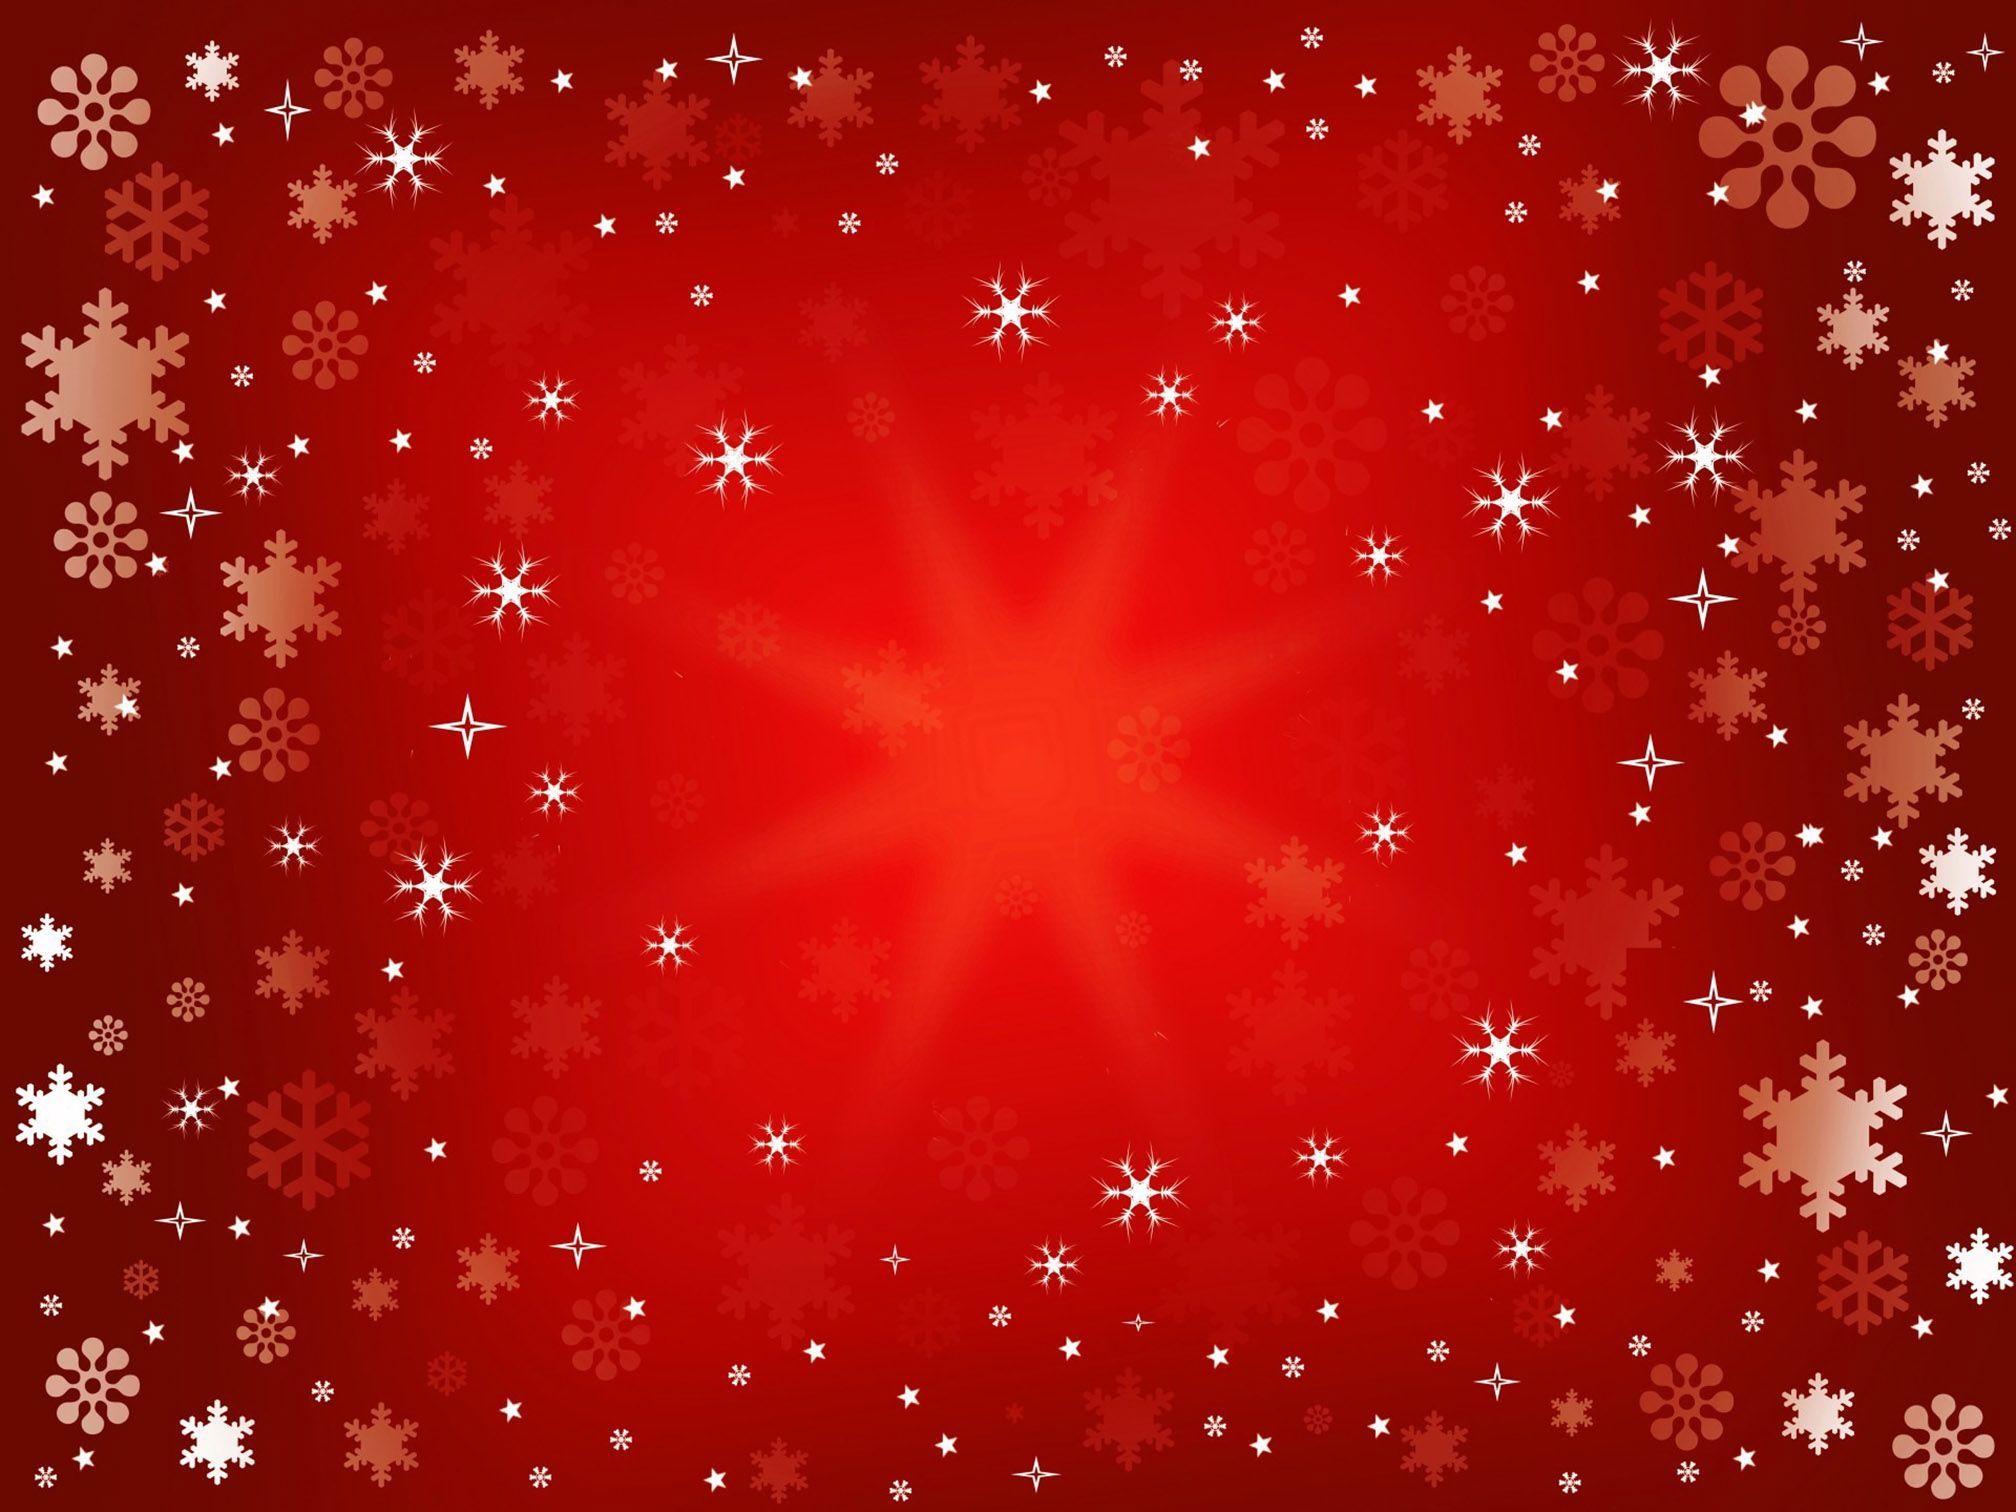 Red Christmas Backgrounds Hd